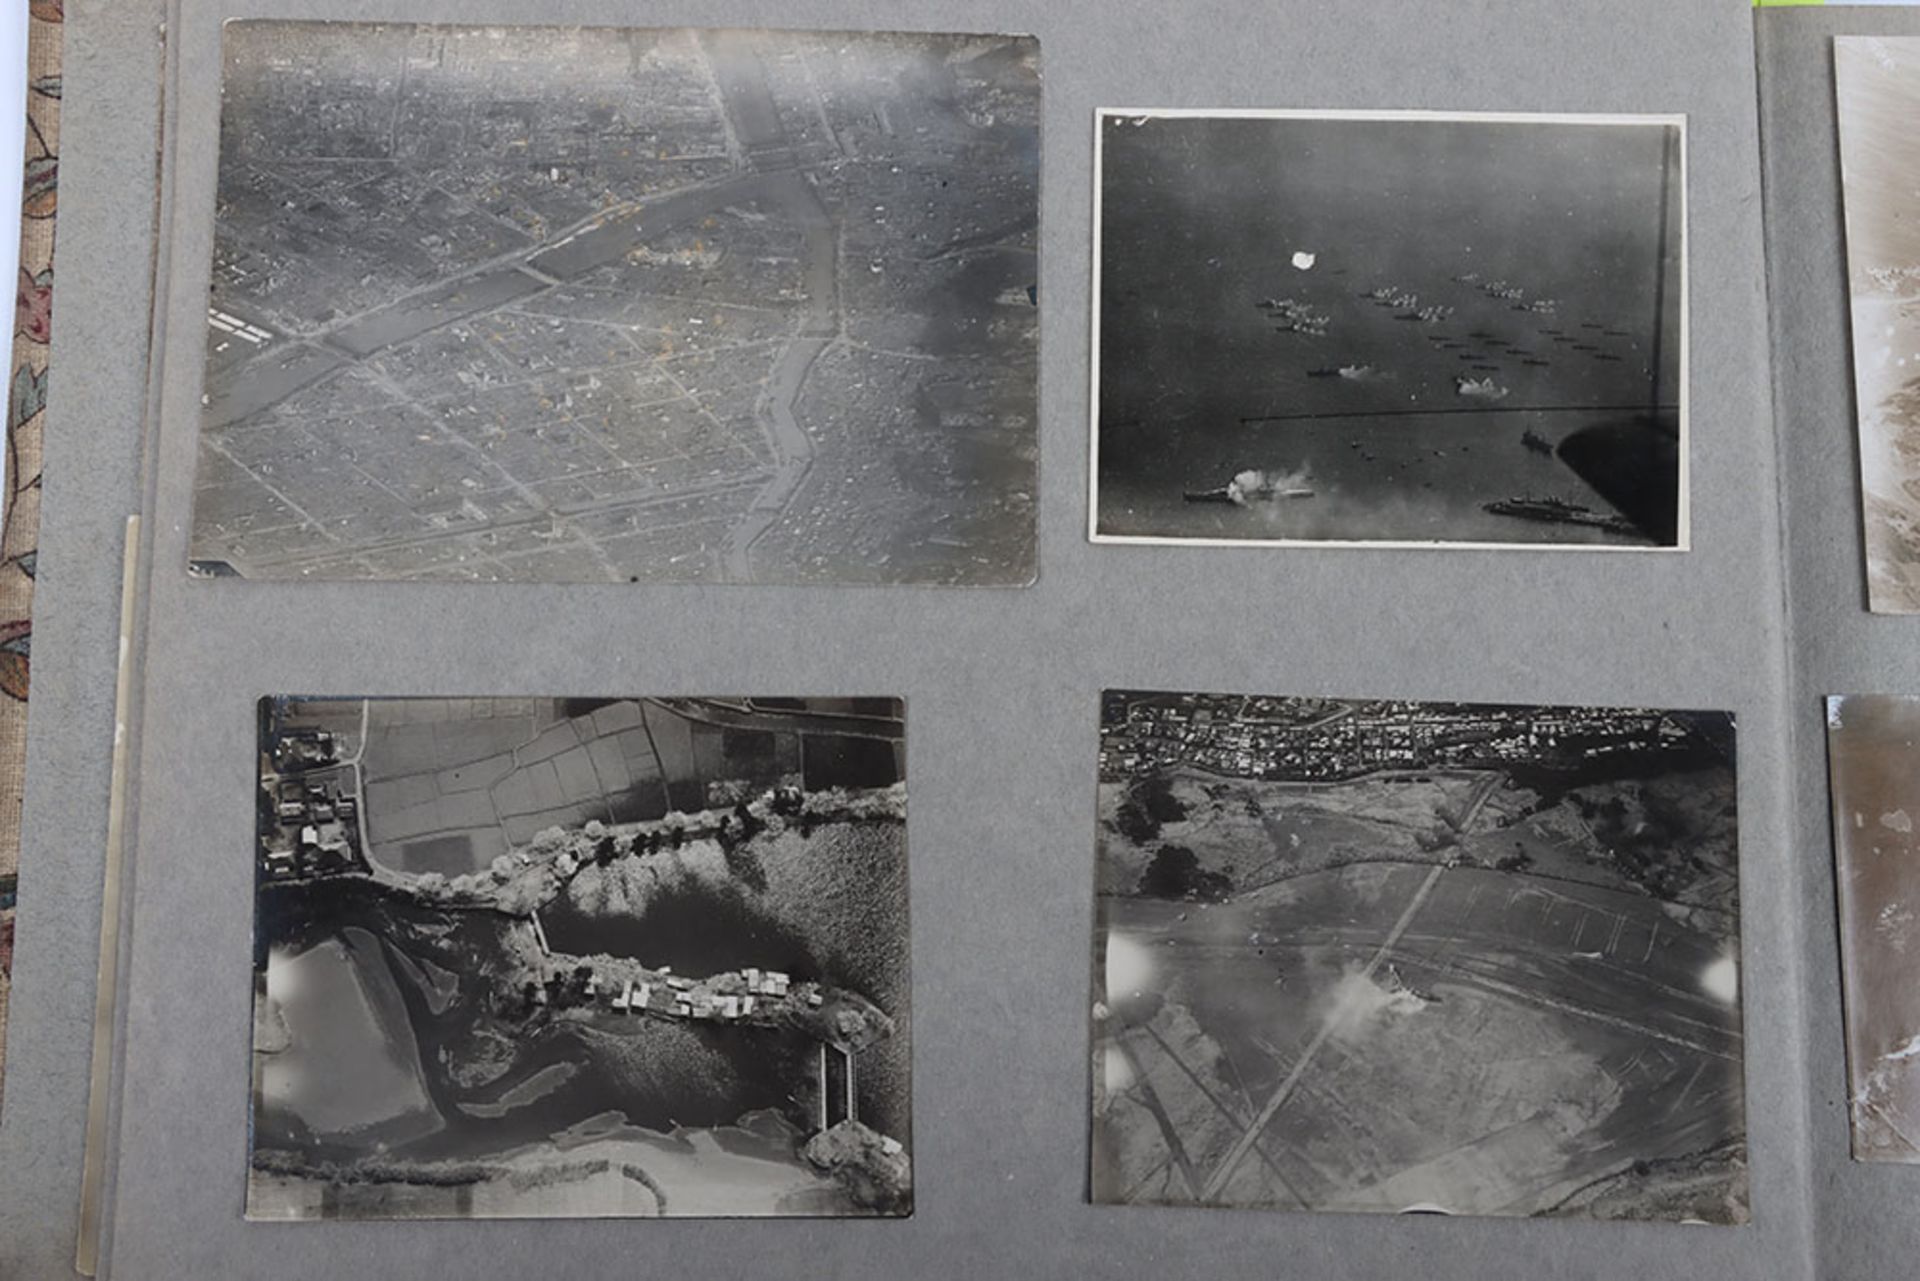 Historically Interesting Photograph Album Compiled by a Member of the Naval Aviation Station at Kasu - Image 45 of 47